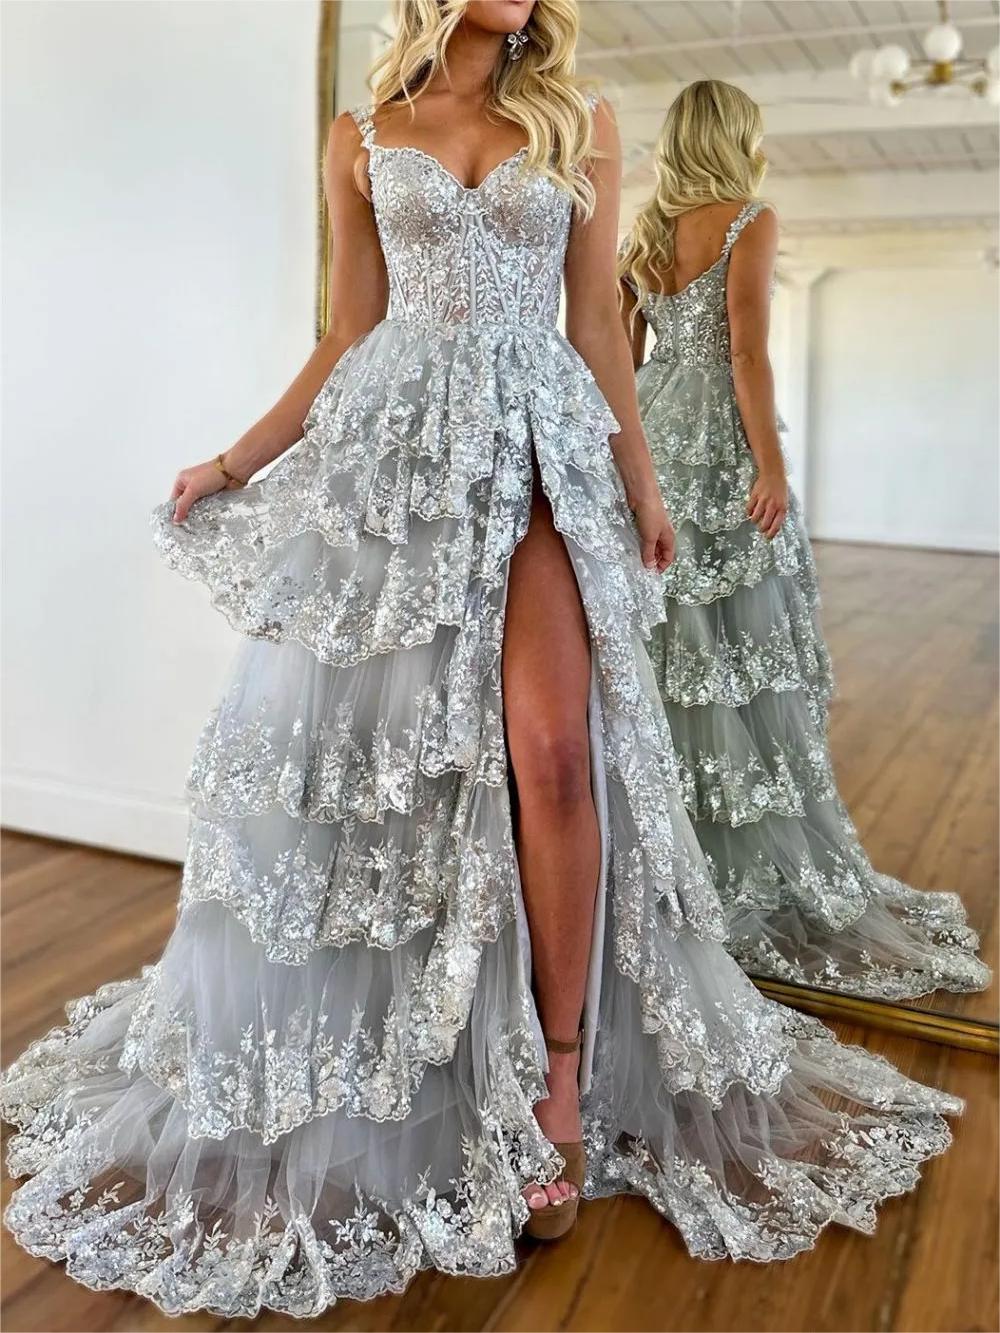 Capri, A-Line Lace Off-the-Shoulder Tiered Long Prom Dress with Slit